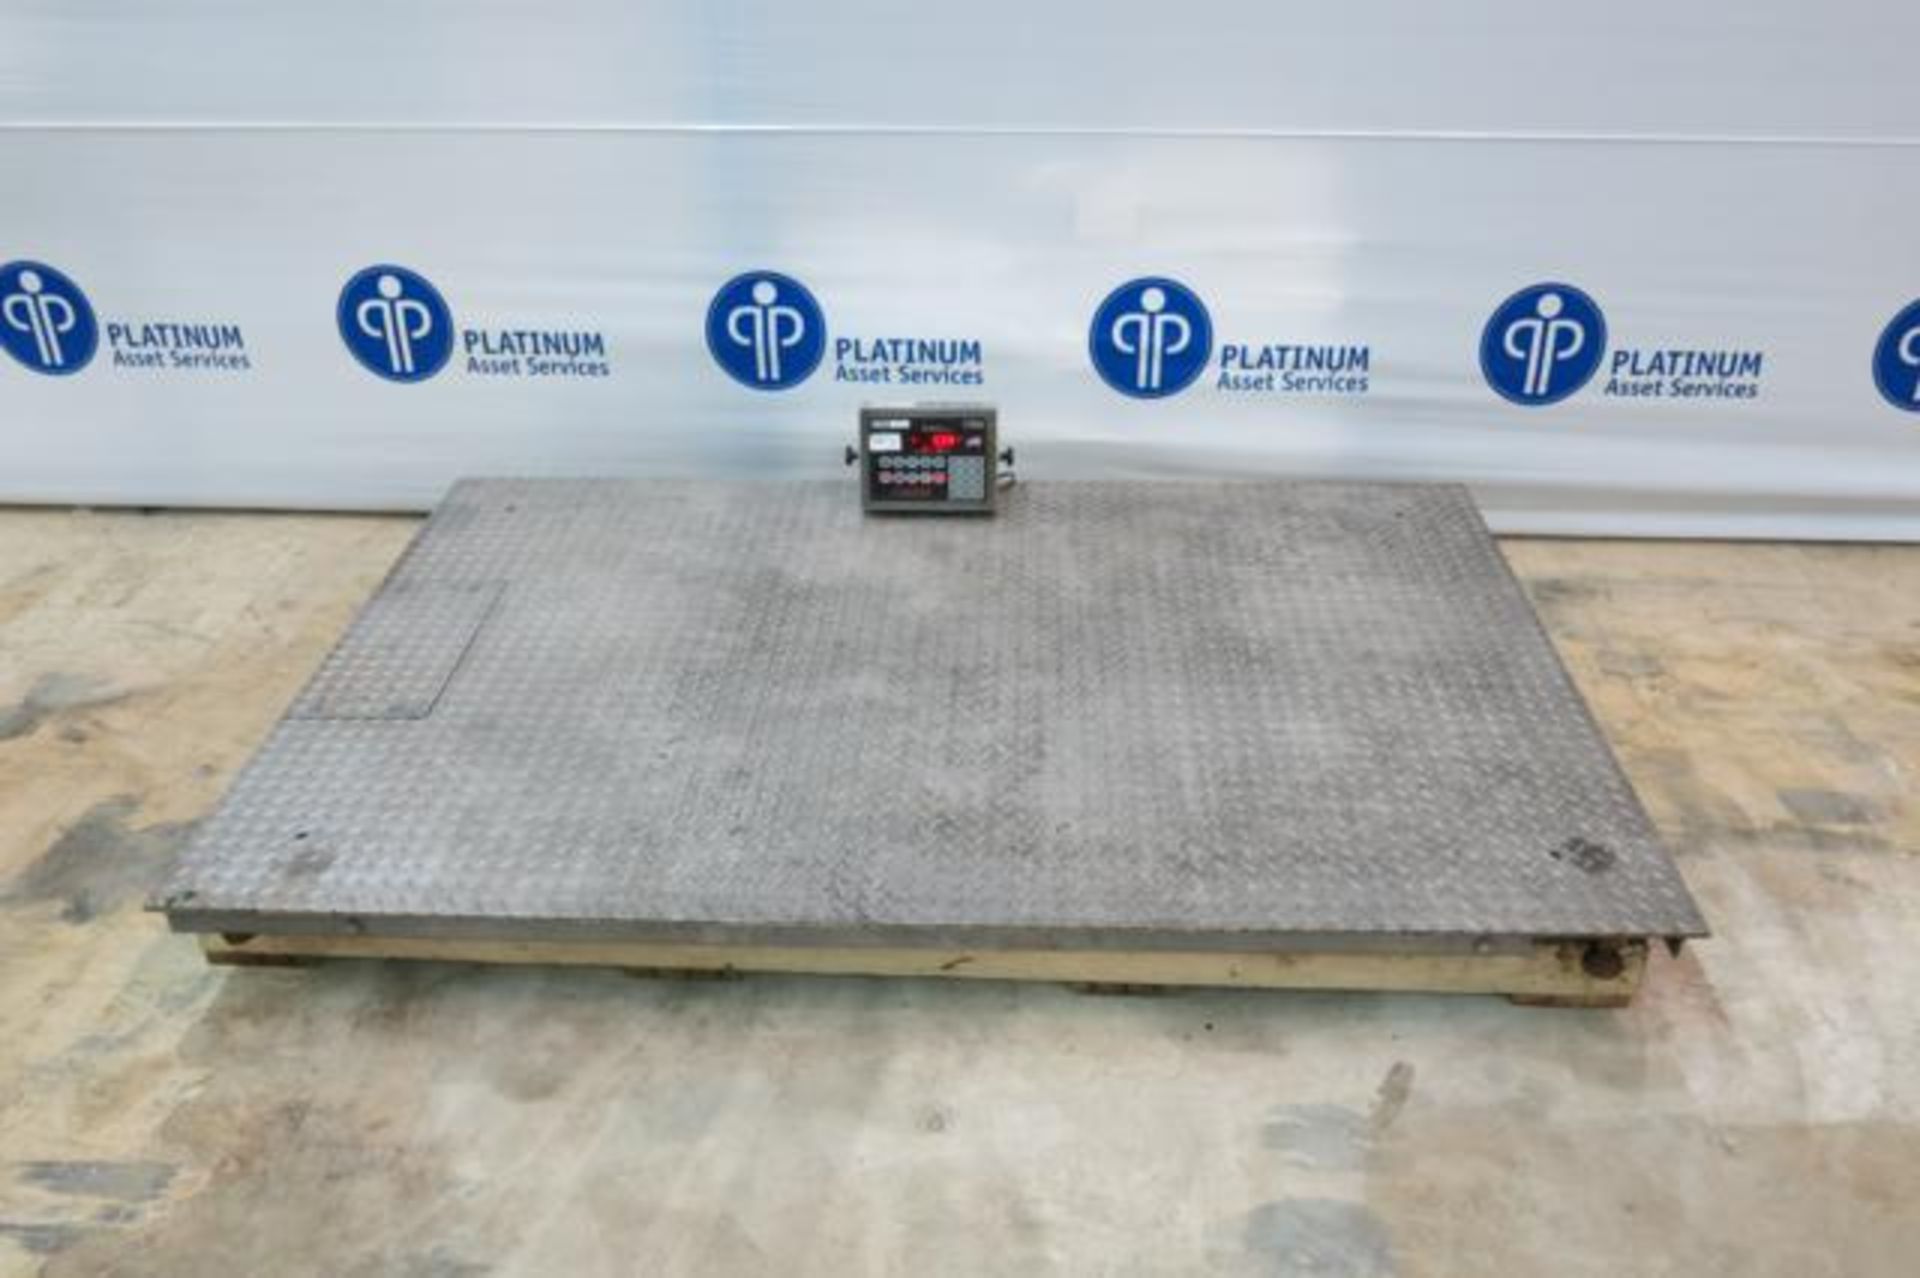 STAINLESS STEEL FLOOR SCALE WITH CARDINAL, STORM 205, DIGITAL WEIGHT INDICATOR, S/N E18213-0126